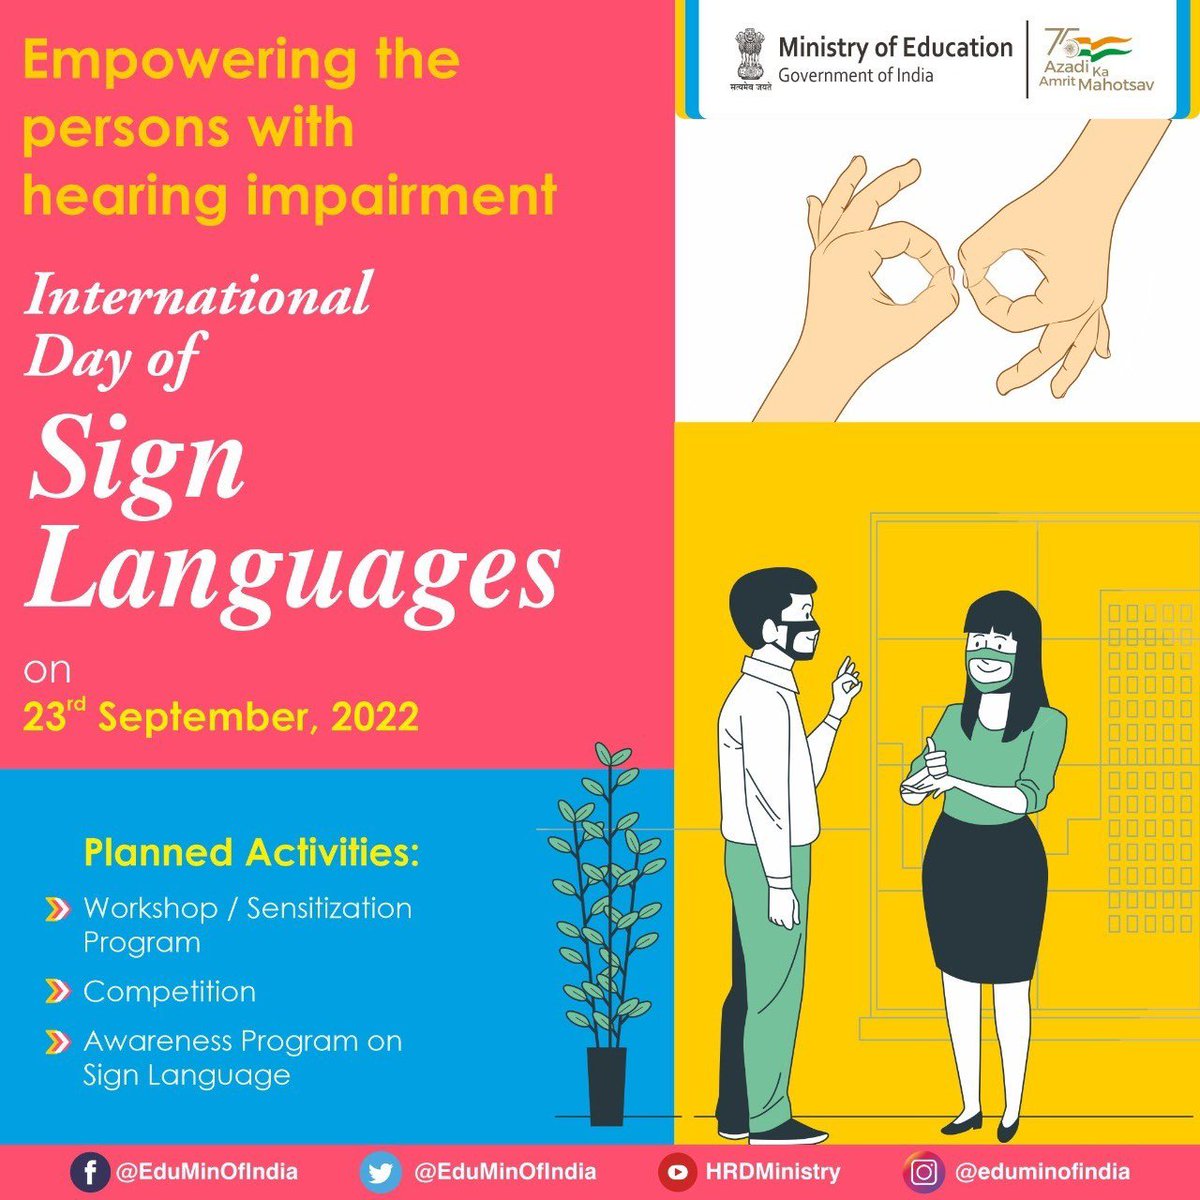 #SignLanguageDay2022: As a part of #AzadiKaAmritMahotsav, the International Day of Sign Languages is being celebrated today (23rd September, 2022). 

The day is observed to raise awareness about the importance of sign languages through a number of activities.